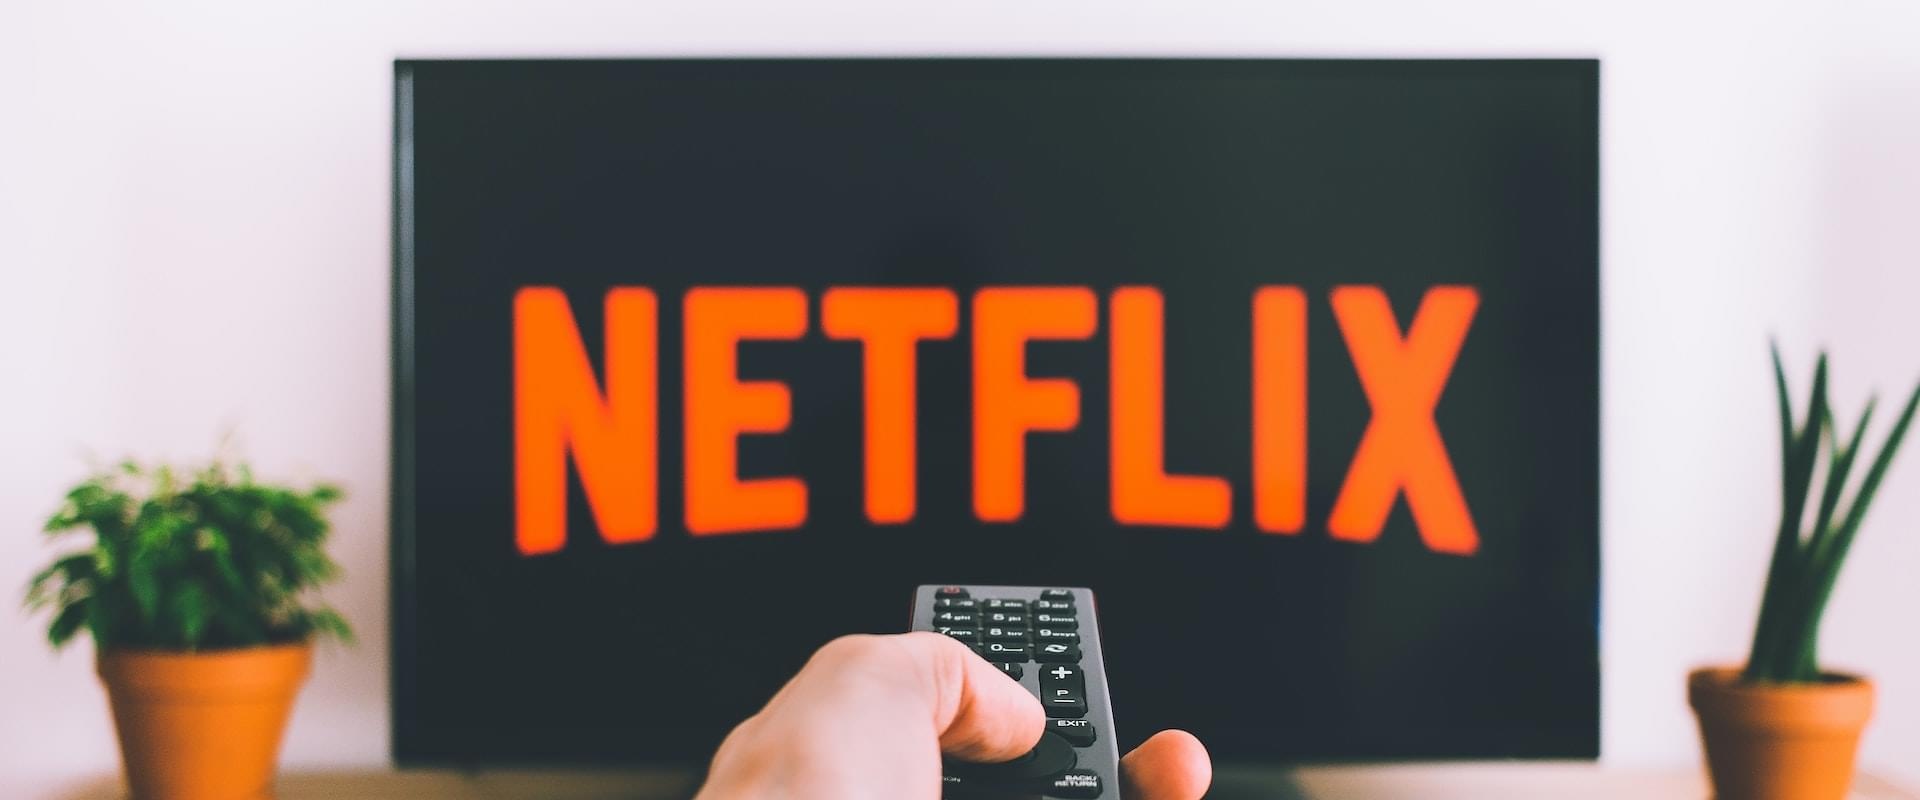 Hand with remote pointing at a TV displaying Netflix logo